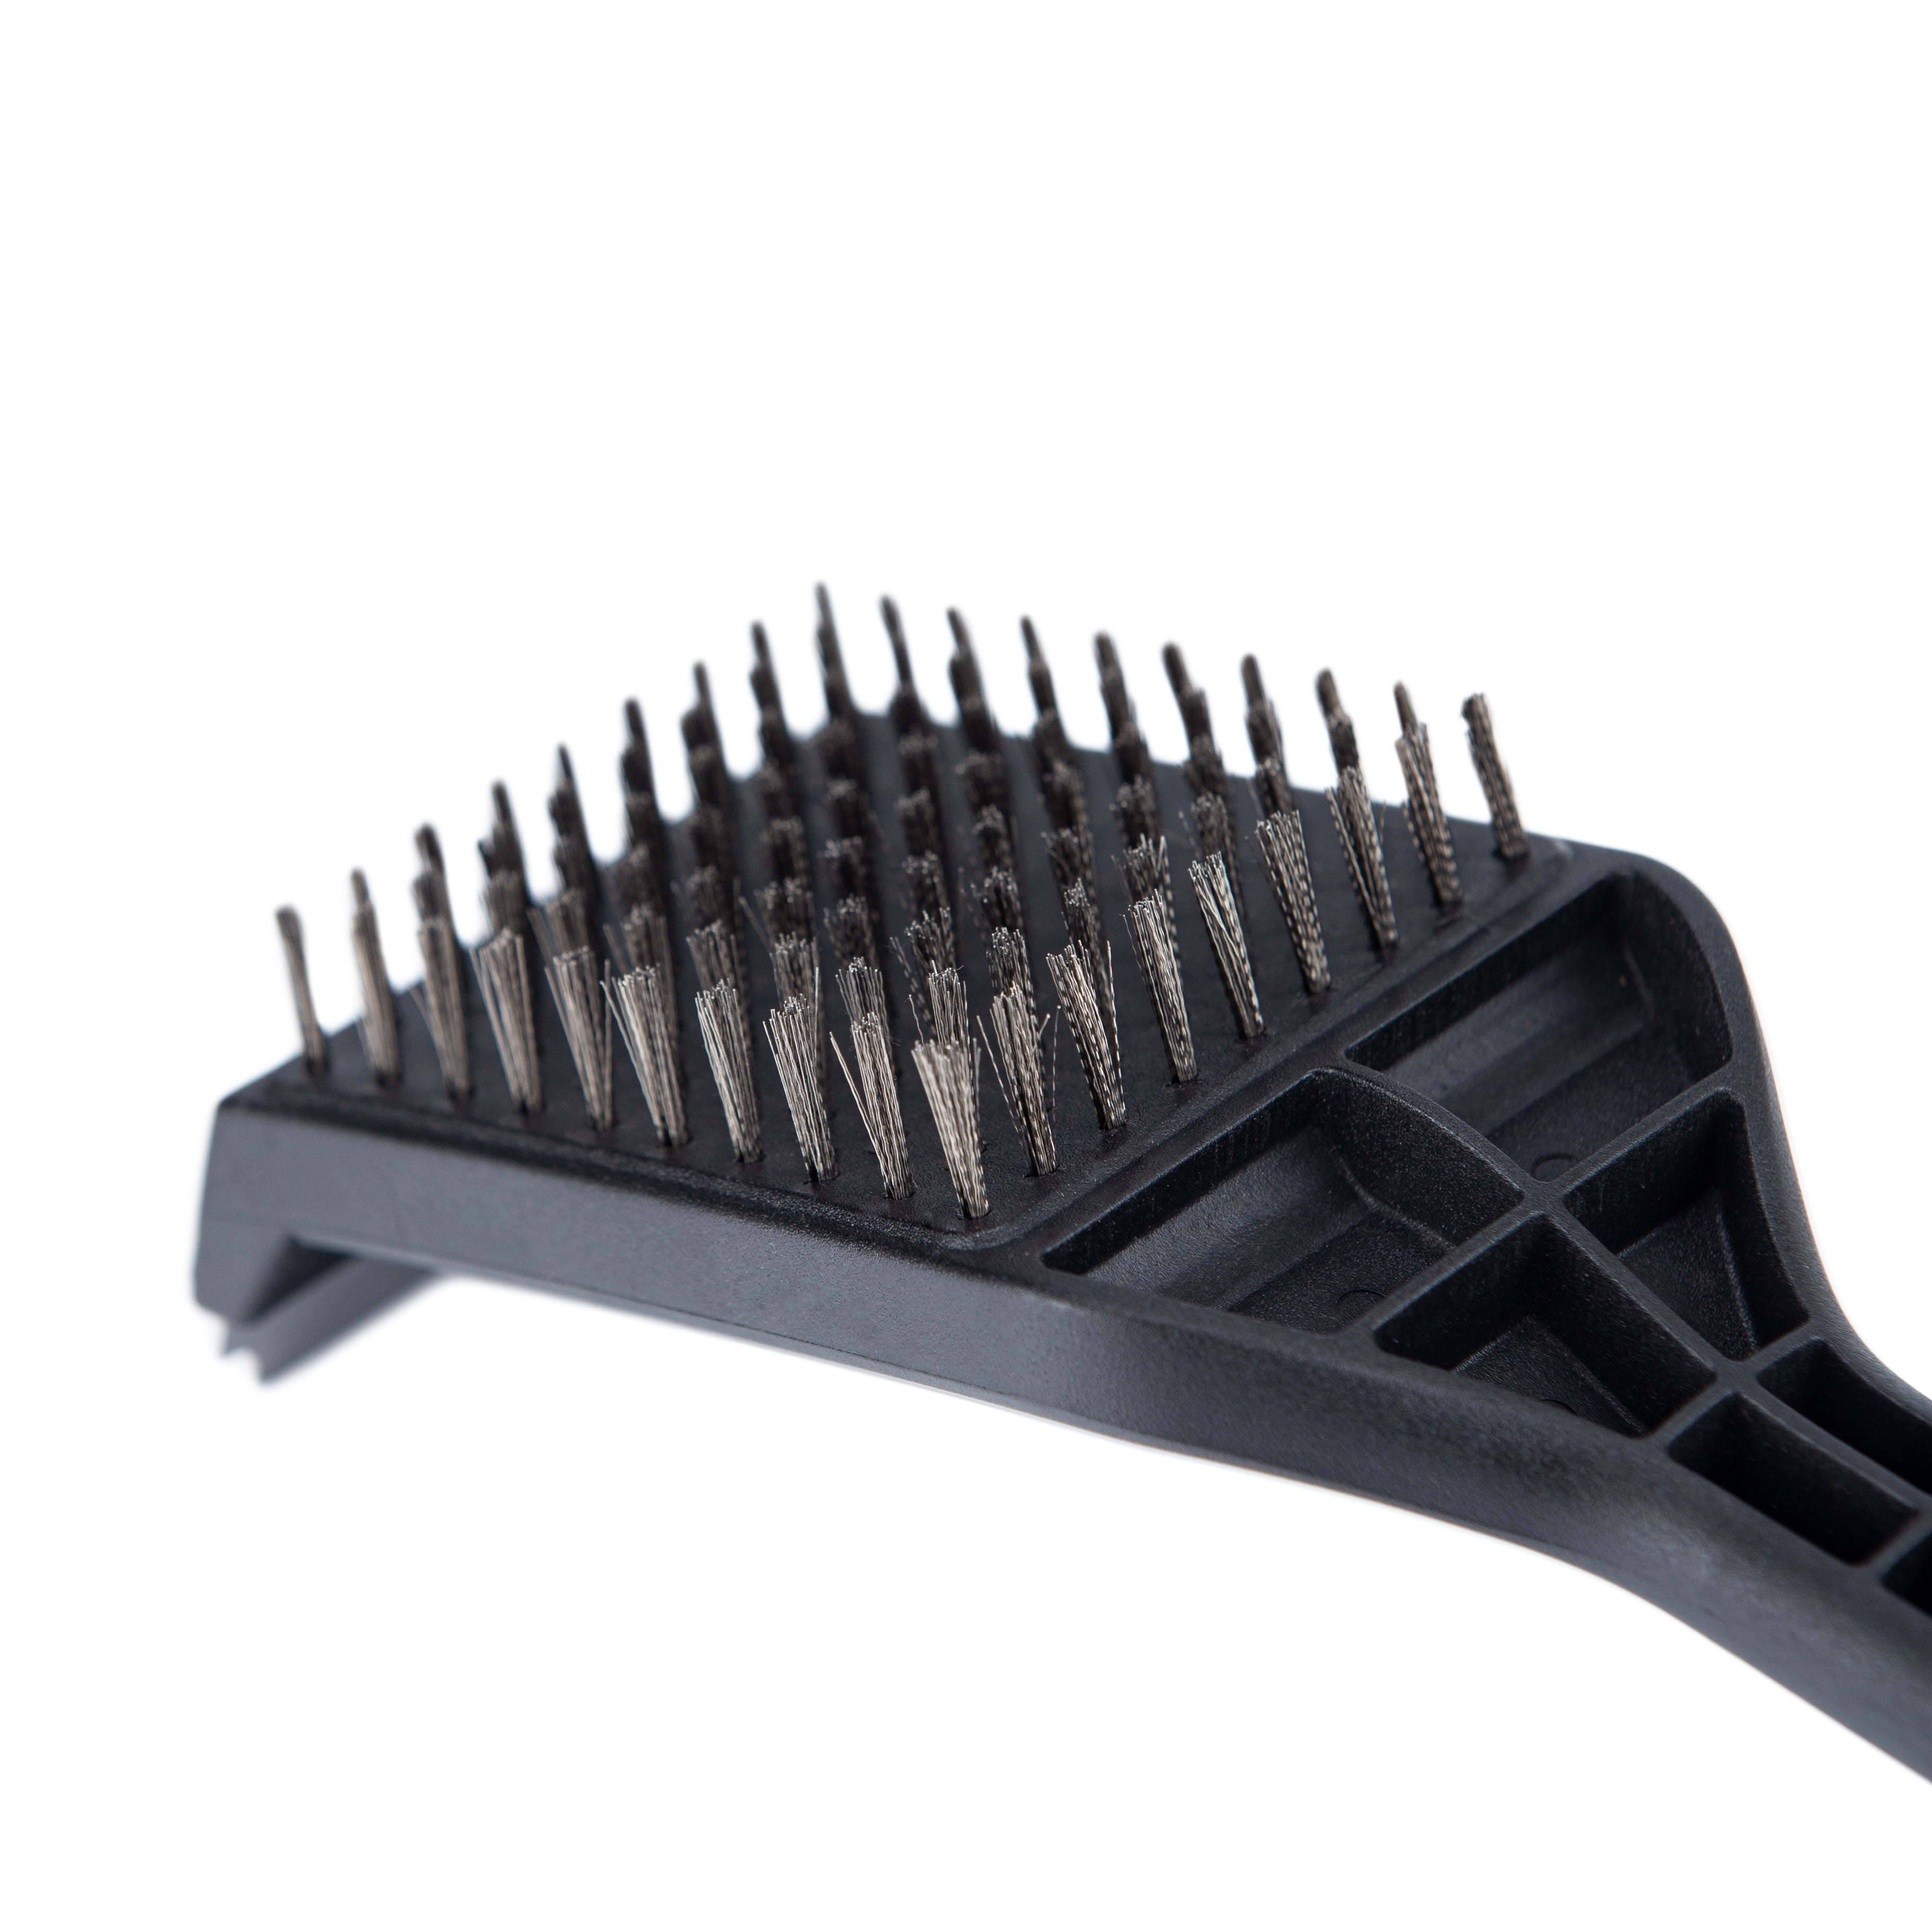 Libman Commercial 529 Long Handle Grill Brush with Scraper, Brass Fibers,  18 Total Length, Black and Gray (Pack of 6)